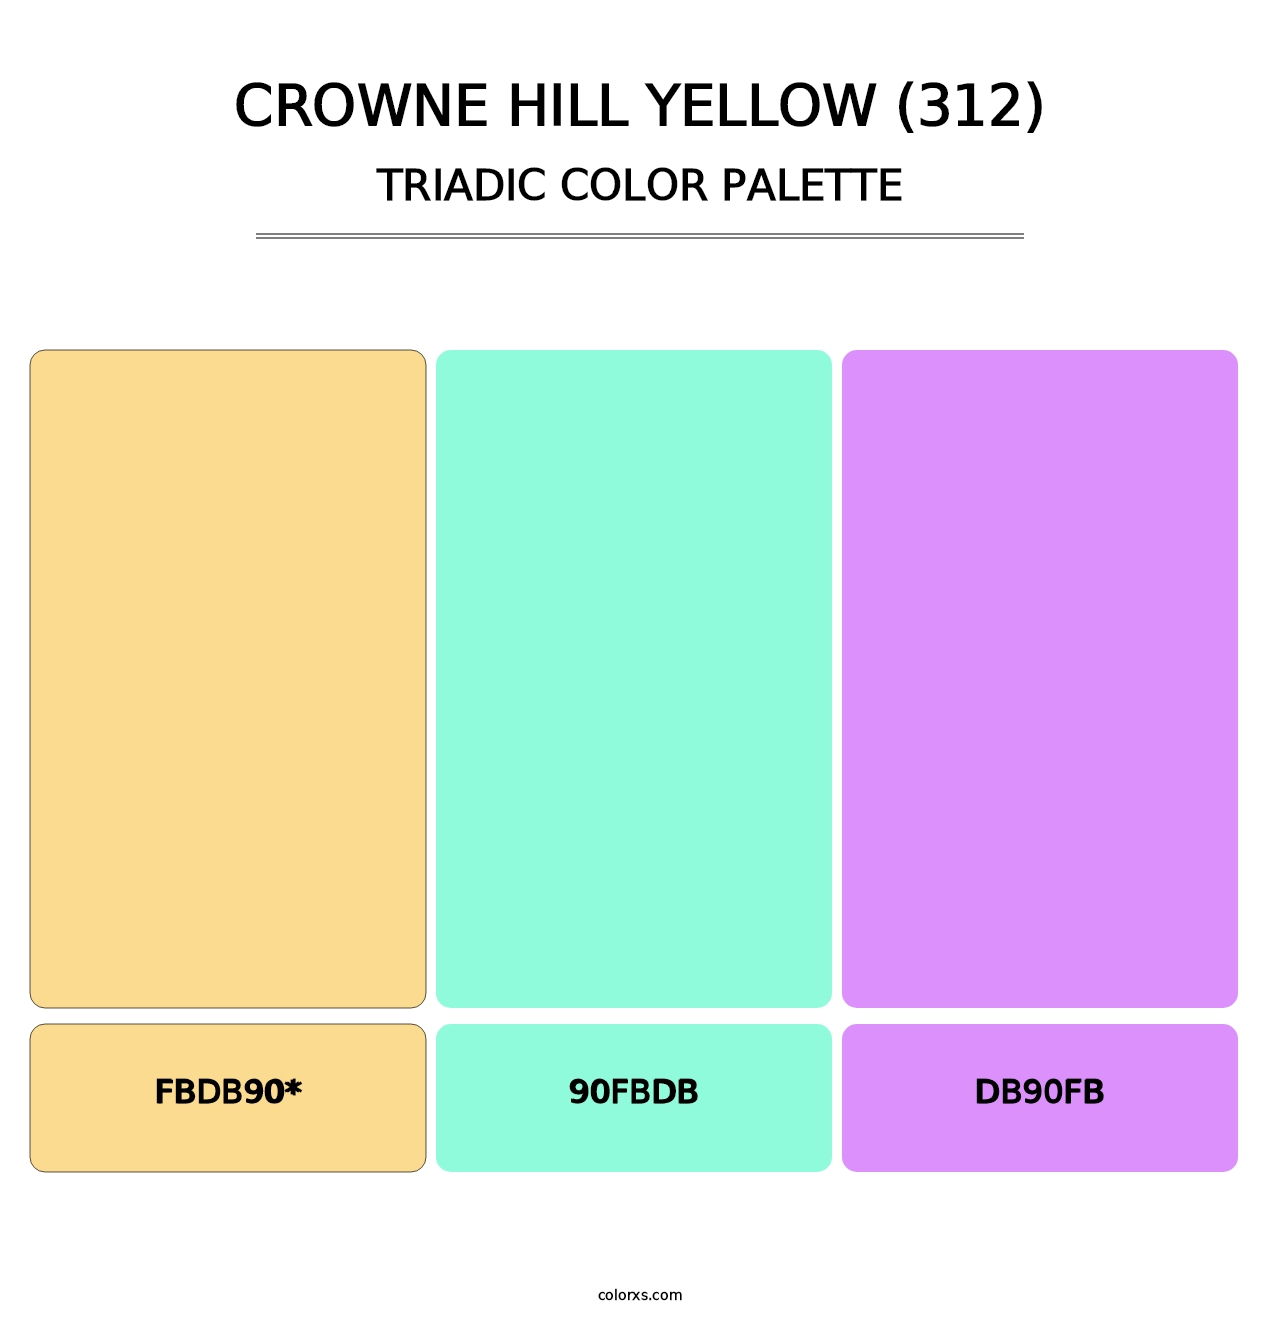 Crowne Hill Yellow (312) - Triadic Color Palette